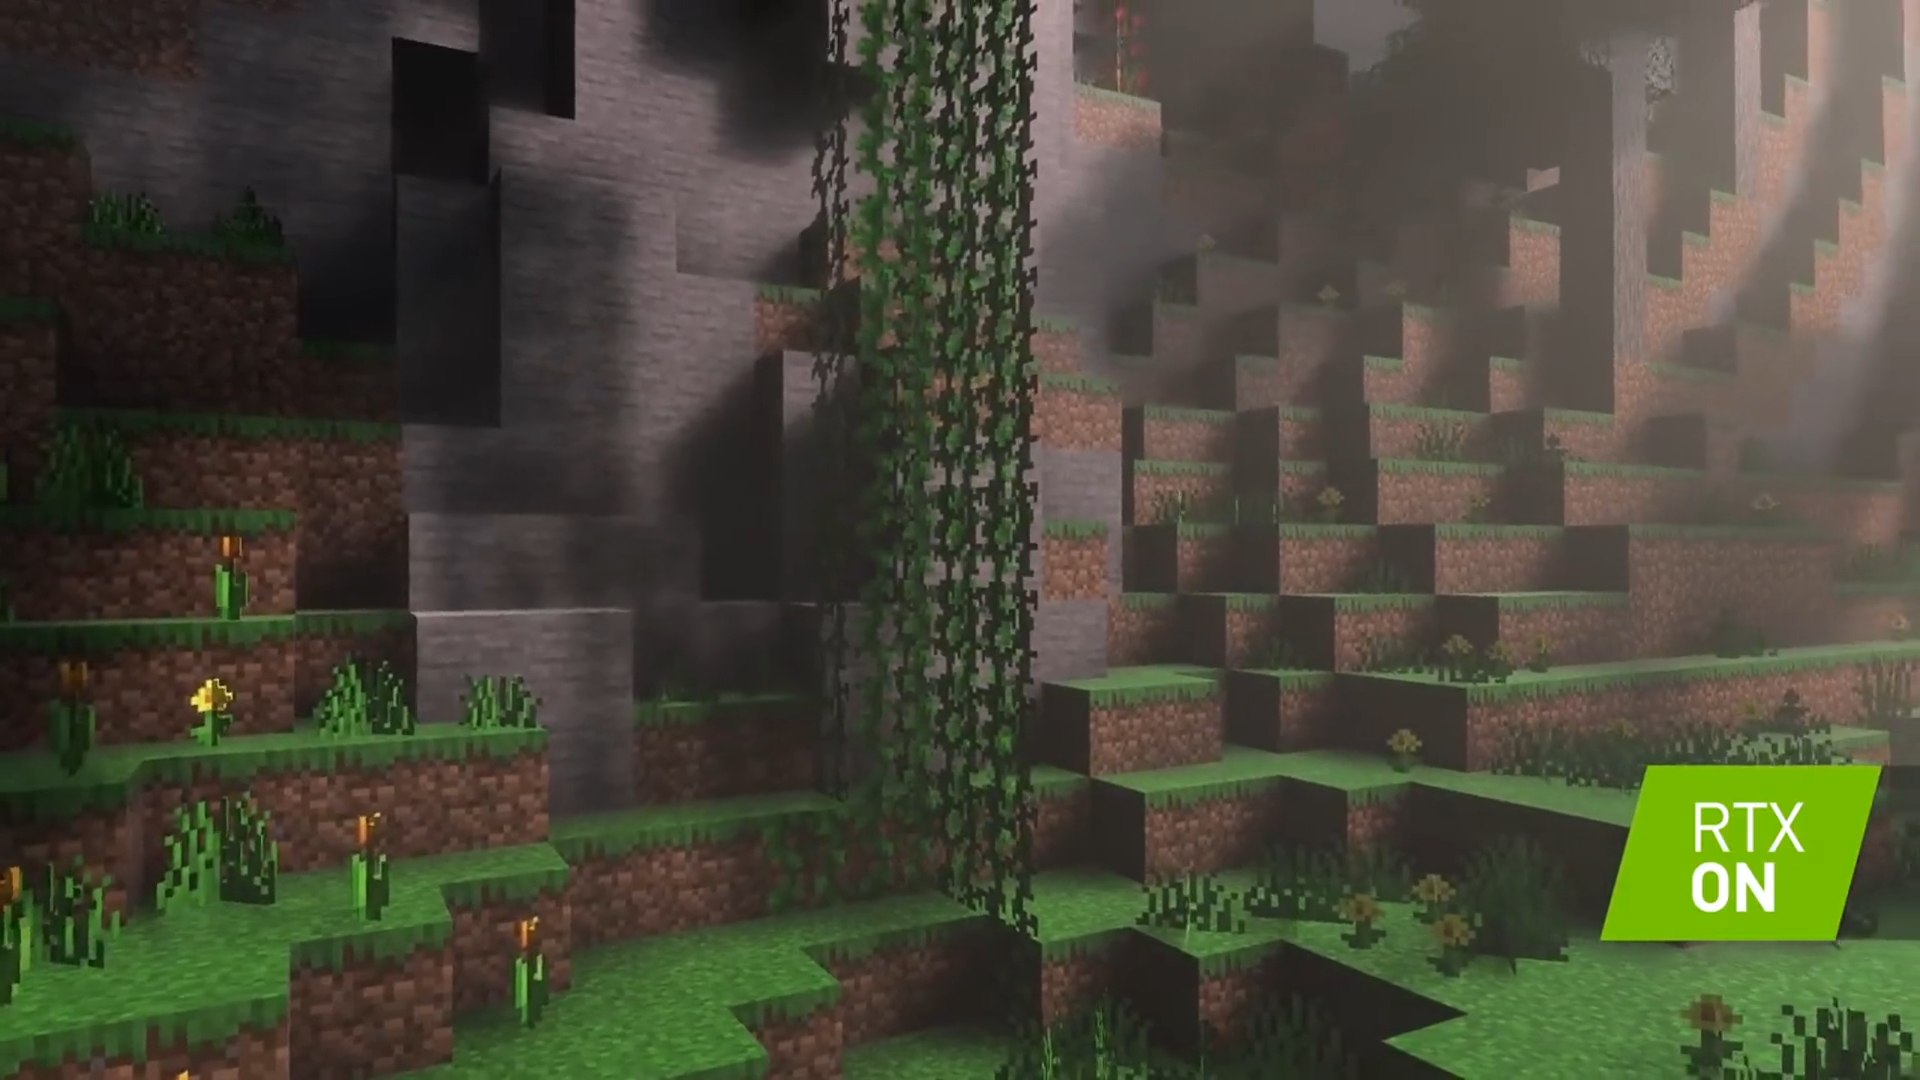 Minecraft with RTX  Official GeForce RTX Ray Tracing with HD Textures  Reveal Trailer 